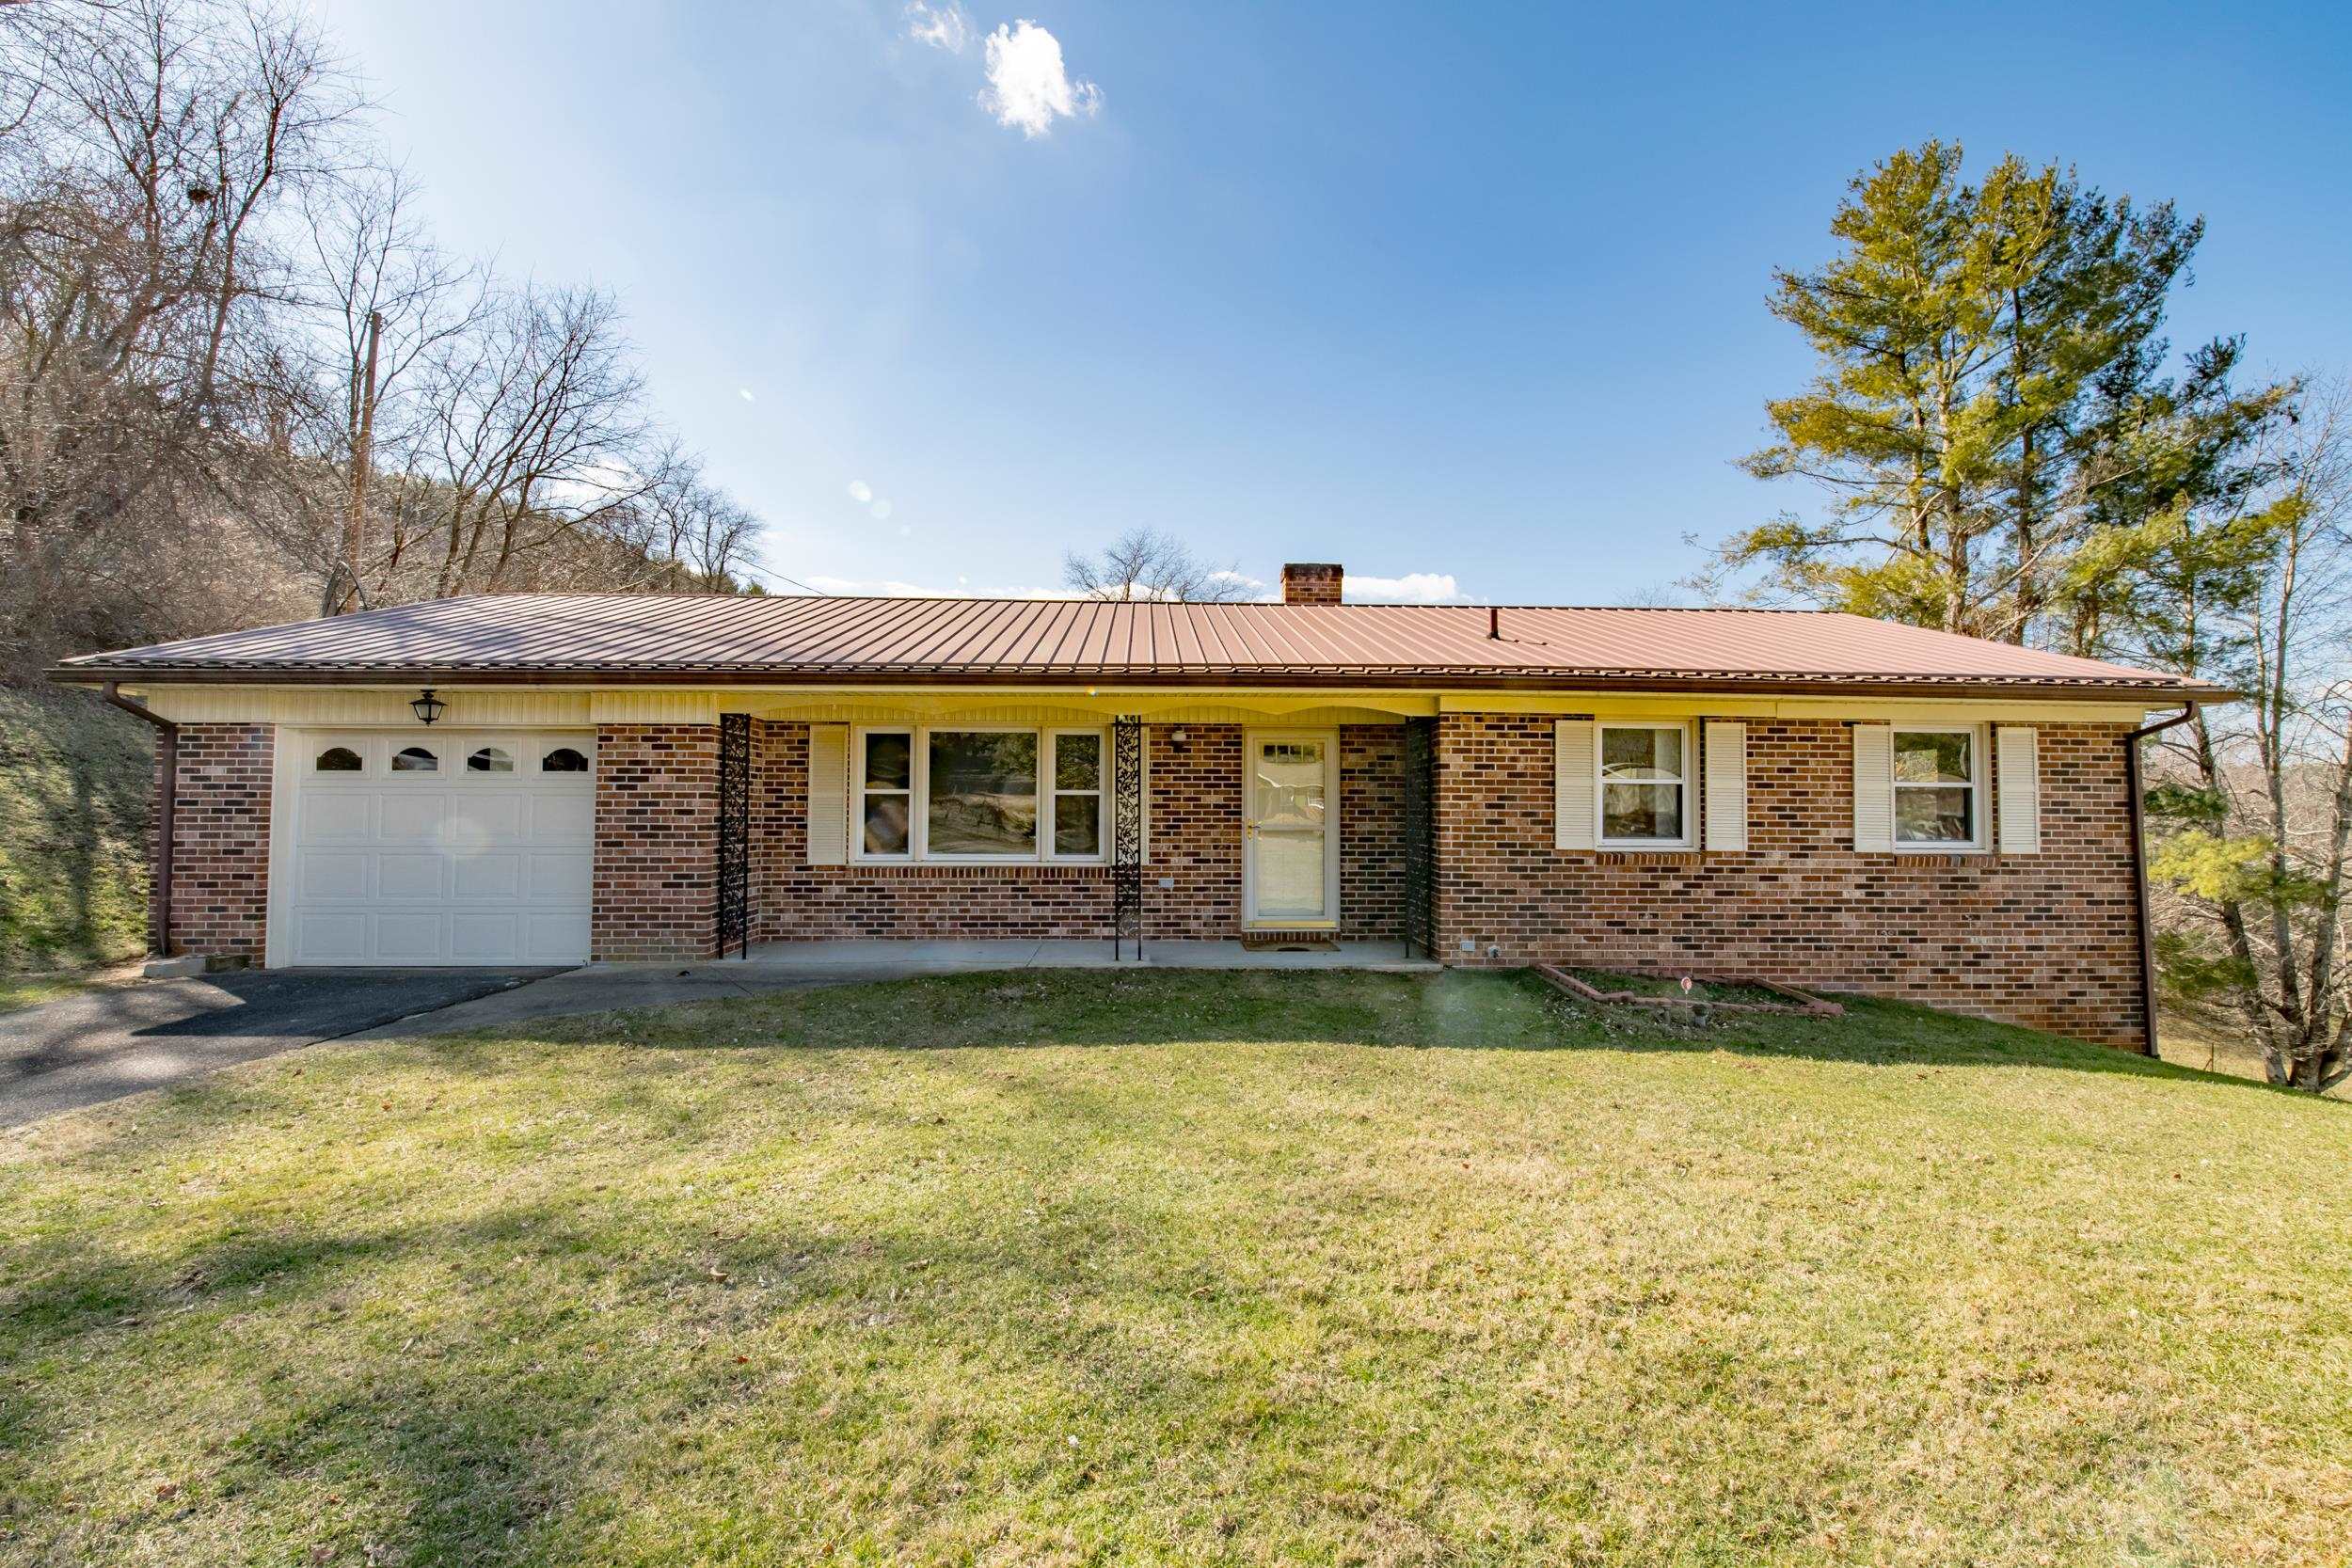 This is a beautifully remodeled brick ranch home in the town of Independence. You have a 1 car attached garage that flows into a bonus room and kitchen. The kitchen was designed with tons of custom features. You have a built in cutting board, knife drawer, and bread box. Most have pull out drawers in the cabinets as well. They don't make them like this anymore. The home is 3 bedroom 2 bath and is heated by an oil furnace, which is very efficient. The house is within walking distance to everything Independence has to offer, to include a well established farmers' market, and small town shopping. You're only about 5 miles from the New River, and about 1.5 miles to the beautiful waterfall called Peach Bottom Falls. The home has fiber optic internet available, since it's in town. You're centrally located with Blacksburg VA & Winston Salem NC both being about an hour and 20 minutes away. You're minutes from Jefferson National Forest. Independence is as cute of a town as it gets, too.